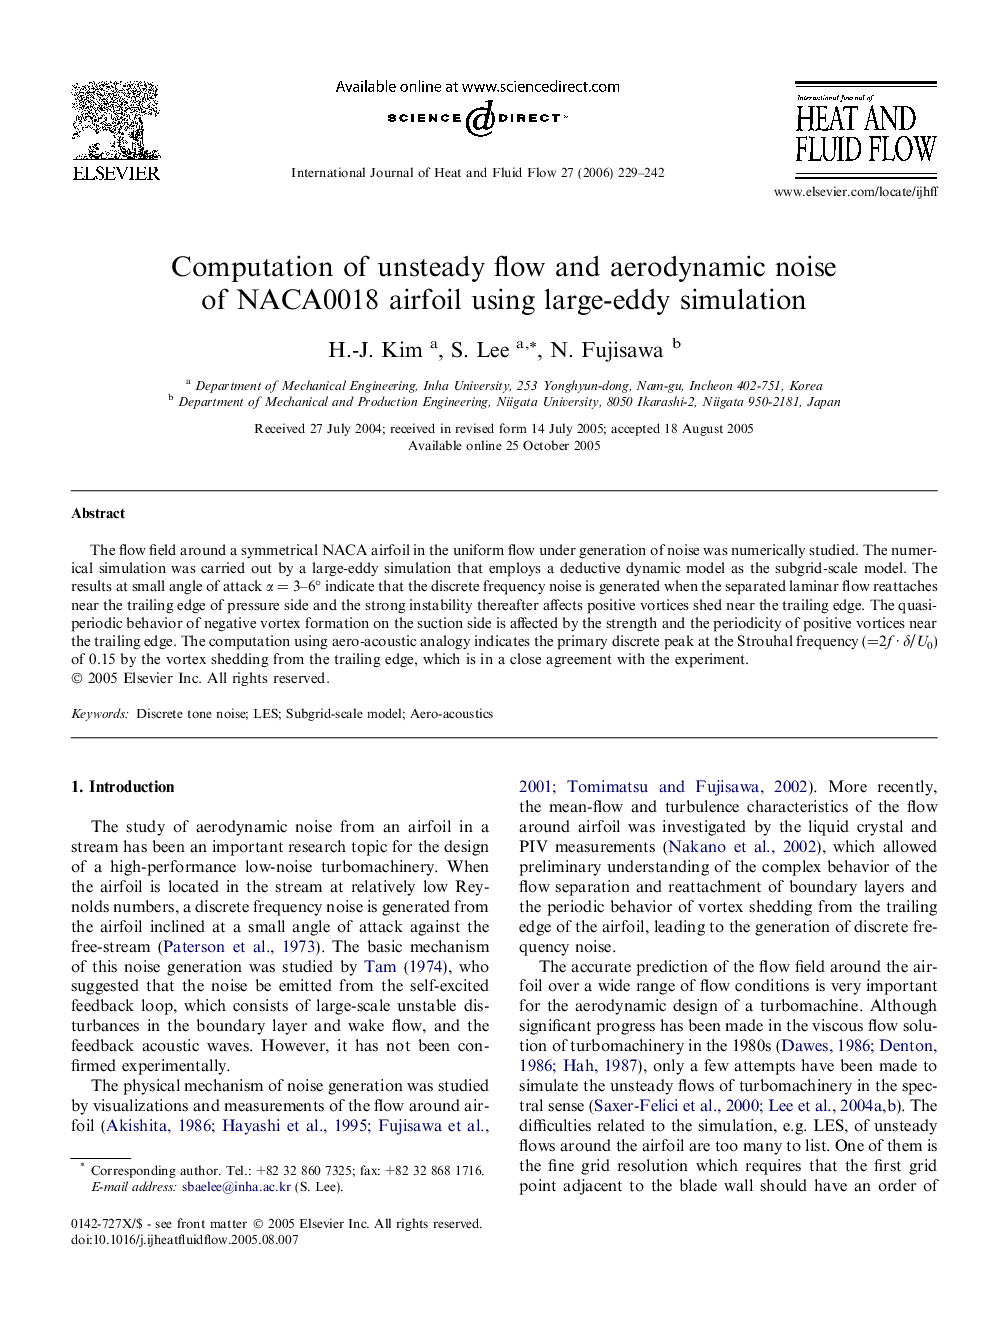 Computation of unsteady flow and aerodynamic noise of NACA0018 airfoil using large-eddy simulation